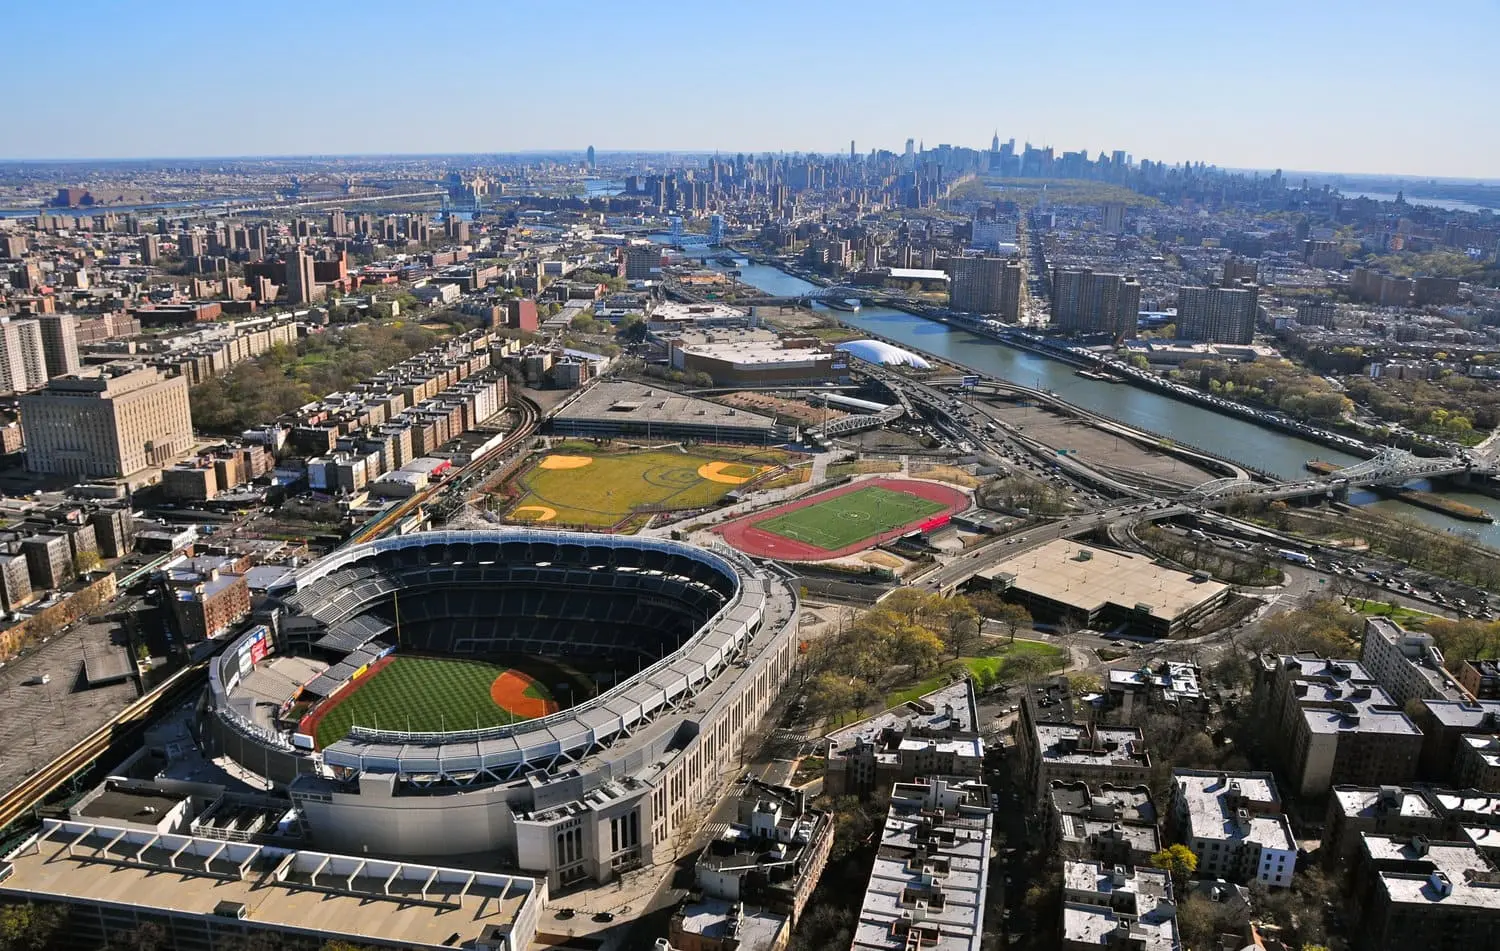 Aerial view of the Bronx, showcasing its urban landscape, prominent landmarks, and interconnected roadways.